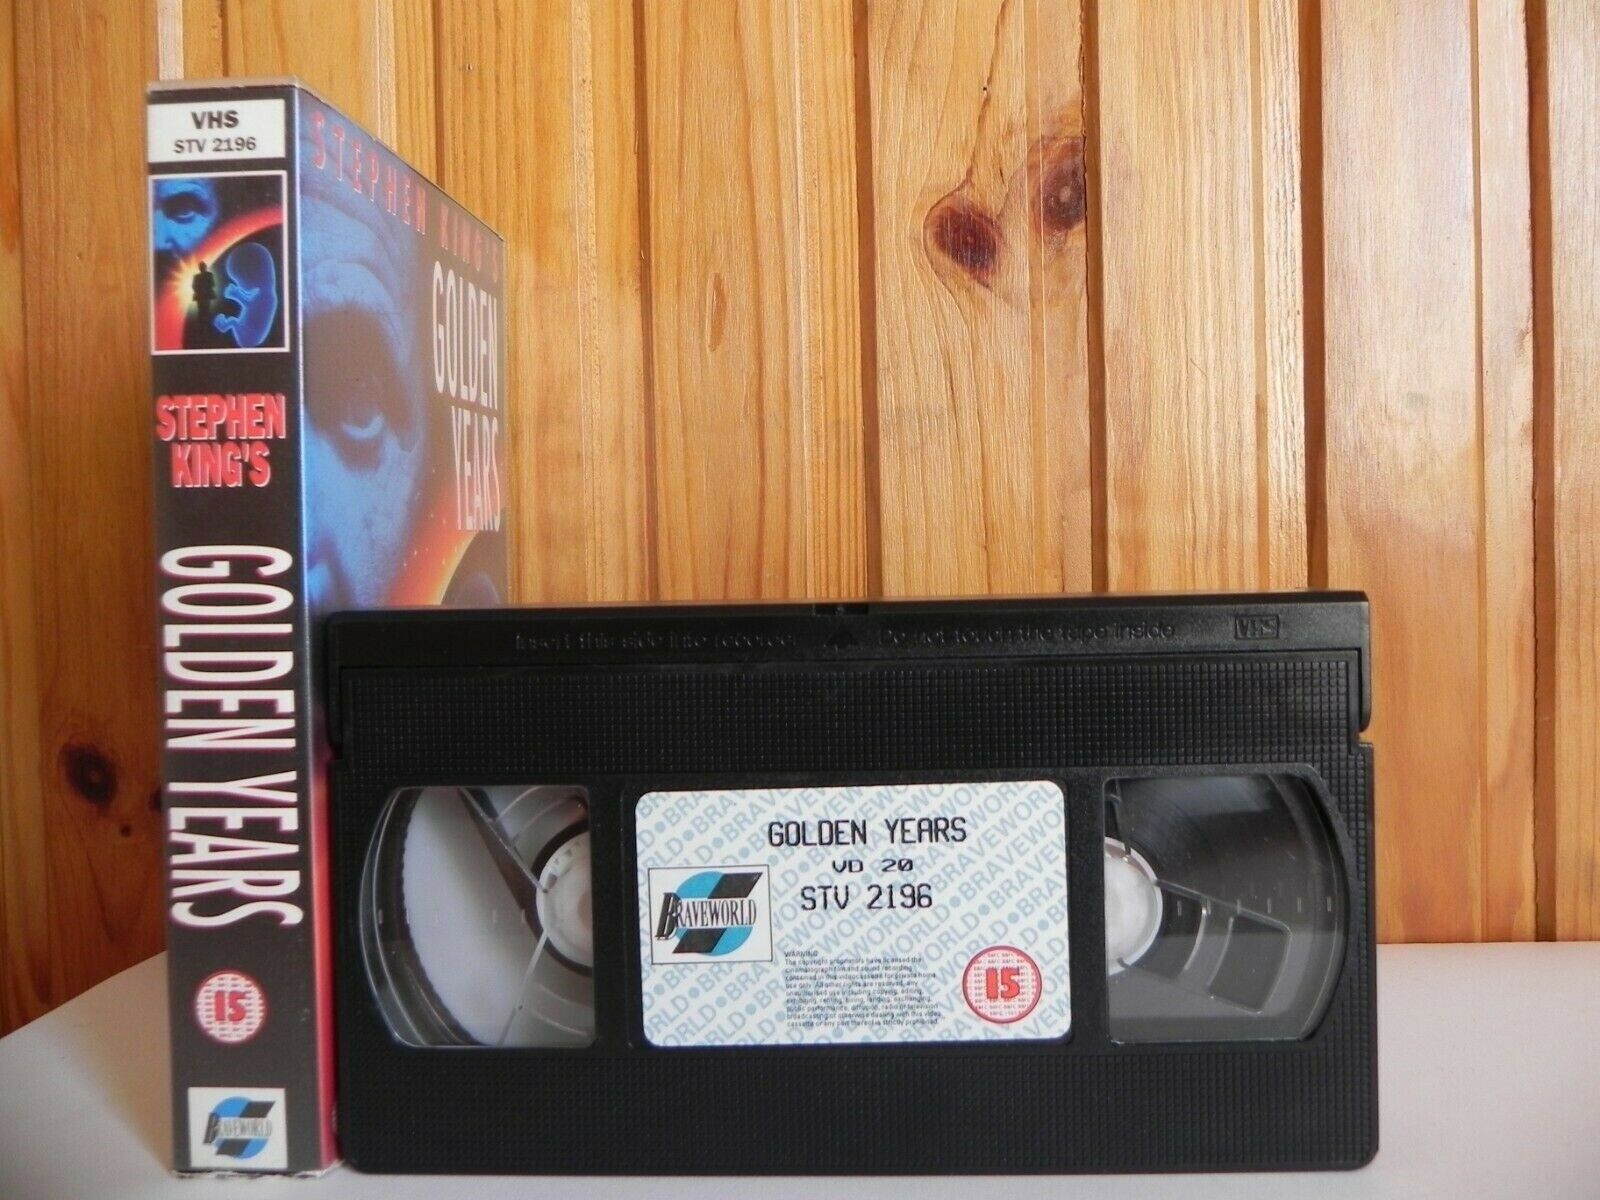 Golden Years: (1991 T.V.) Documentary Created By Stephen King - Mystery - VHS-